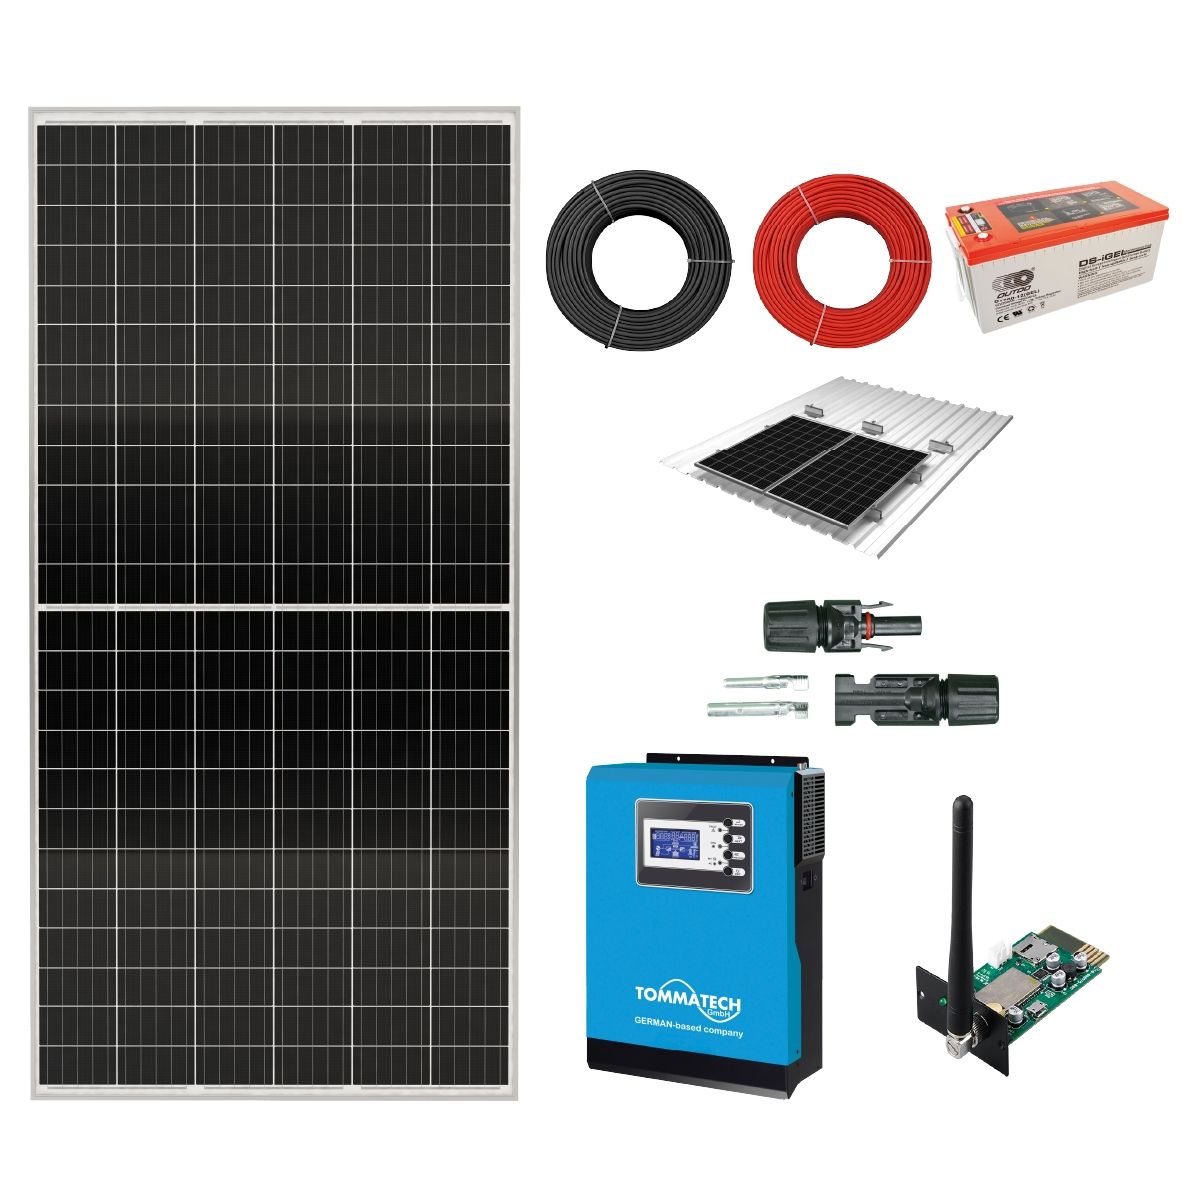 1kW / 455Wp / 2.4kWh / 1~ PWM Solar Off-Grid Solution